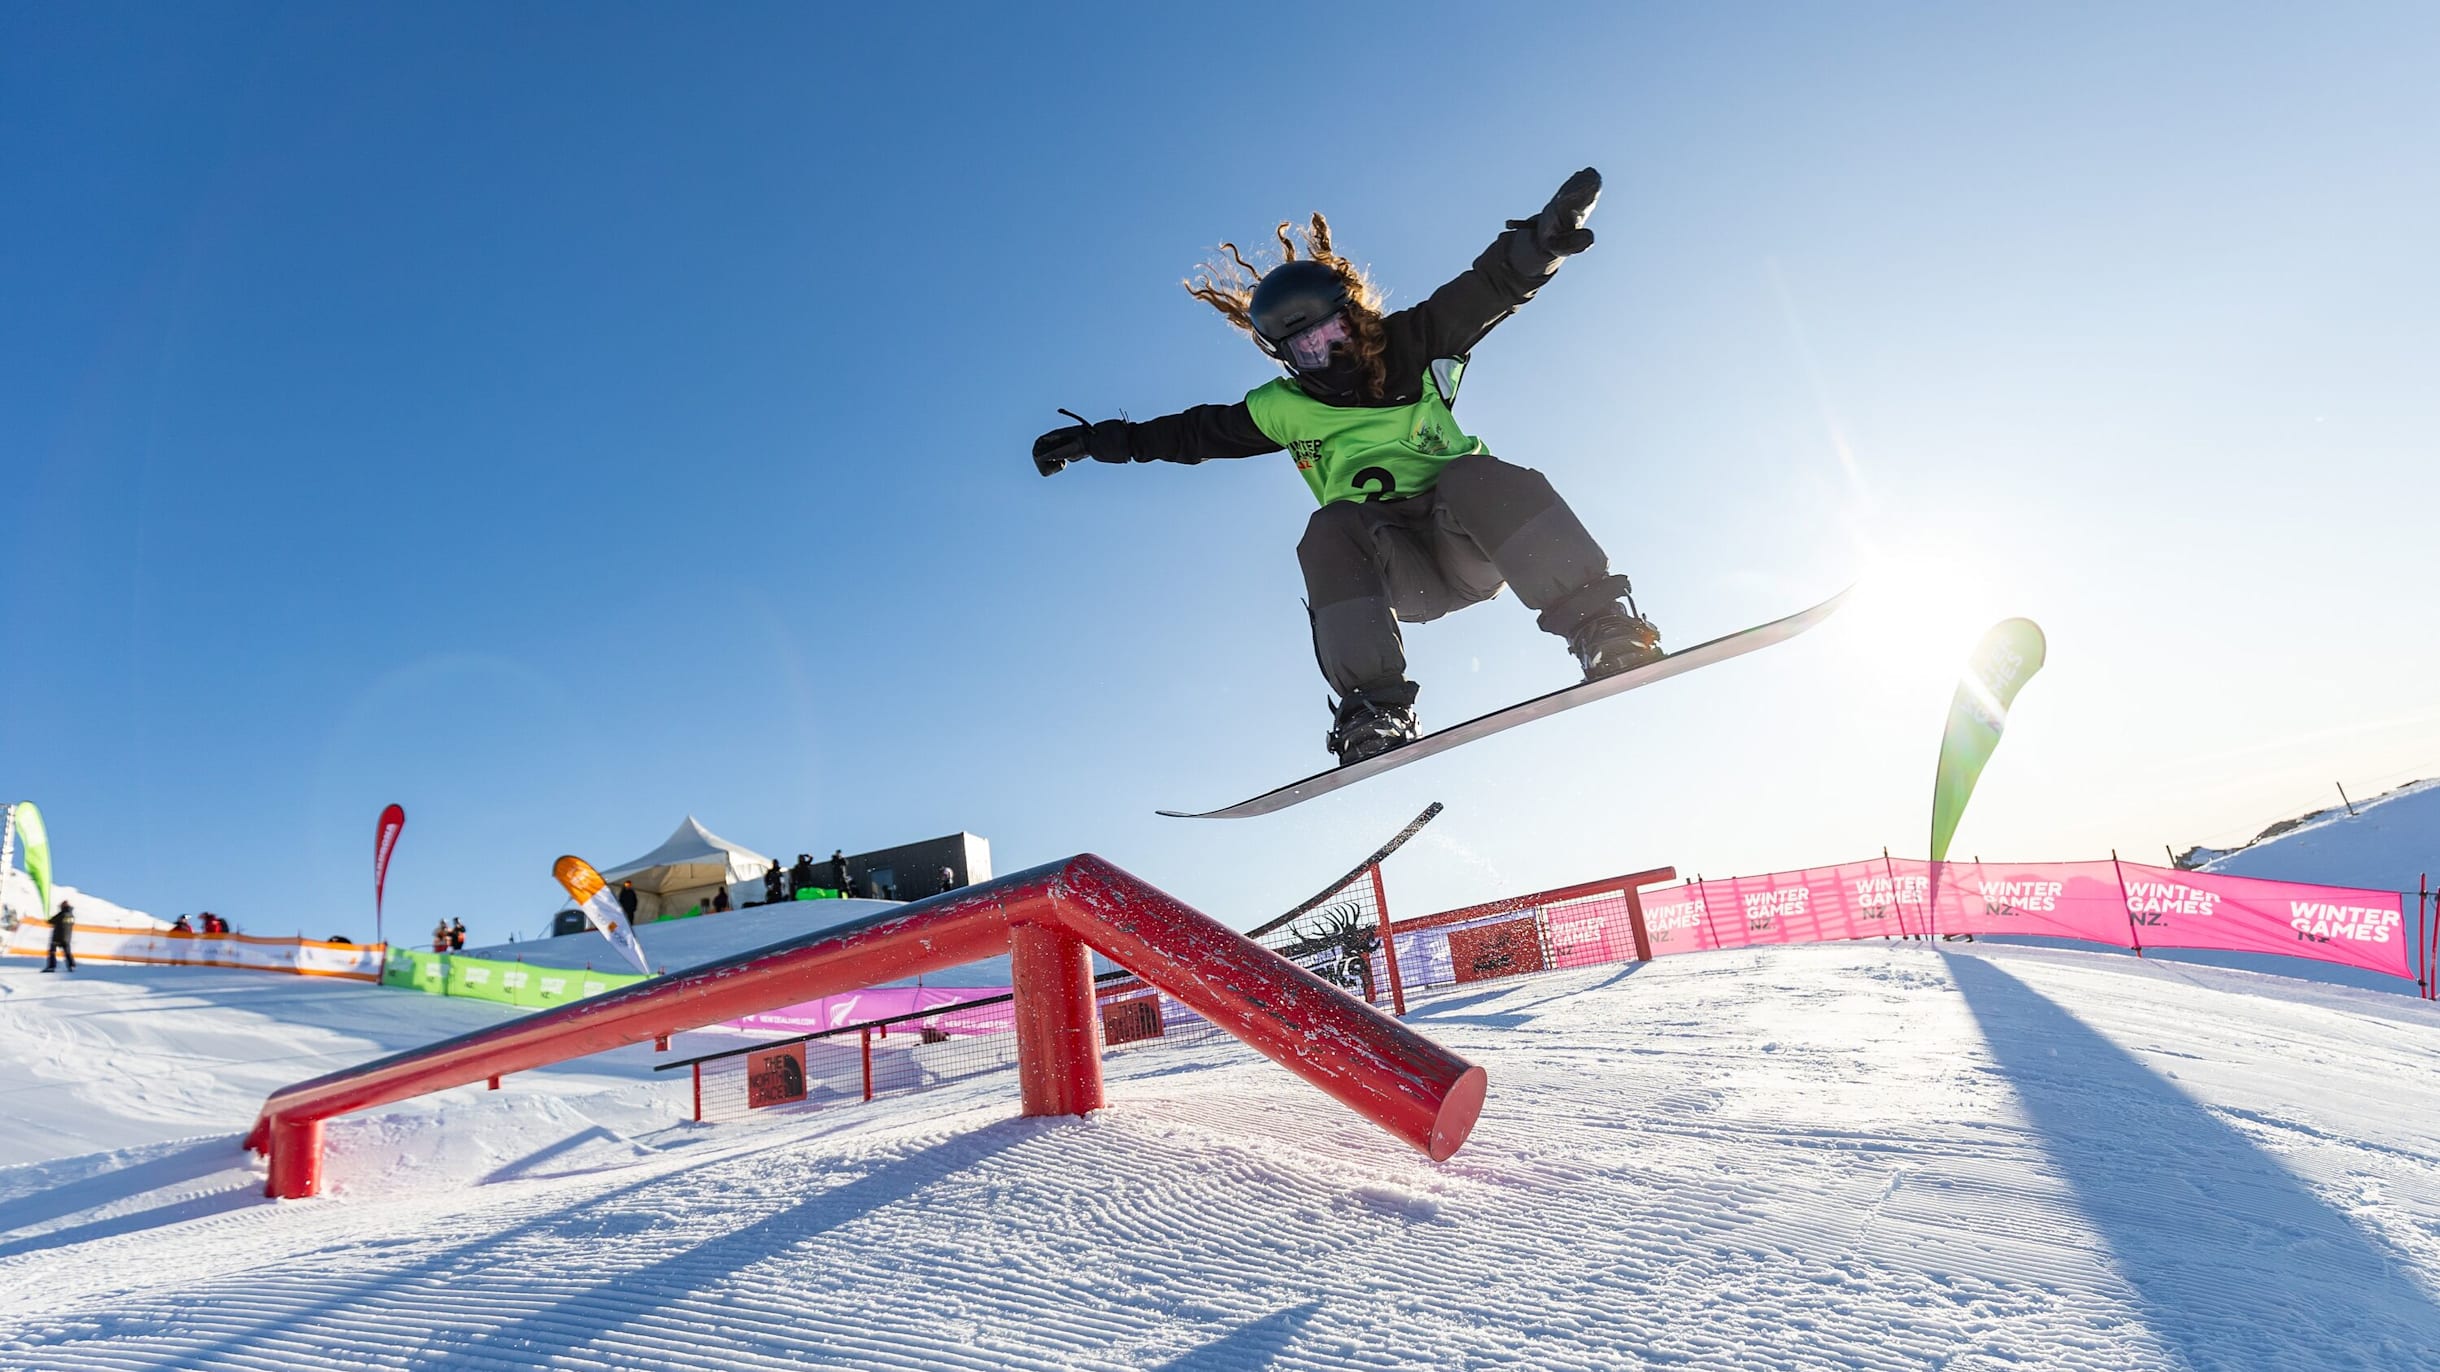 FIS Freeski, Snowboard Park and Pipe Junior World Championships 2023 in Cardrona All final results and medal winners